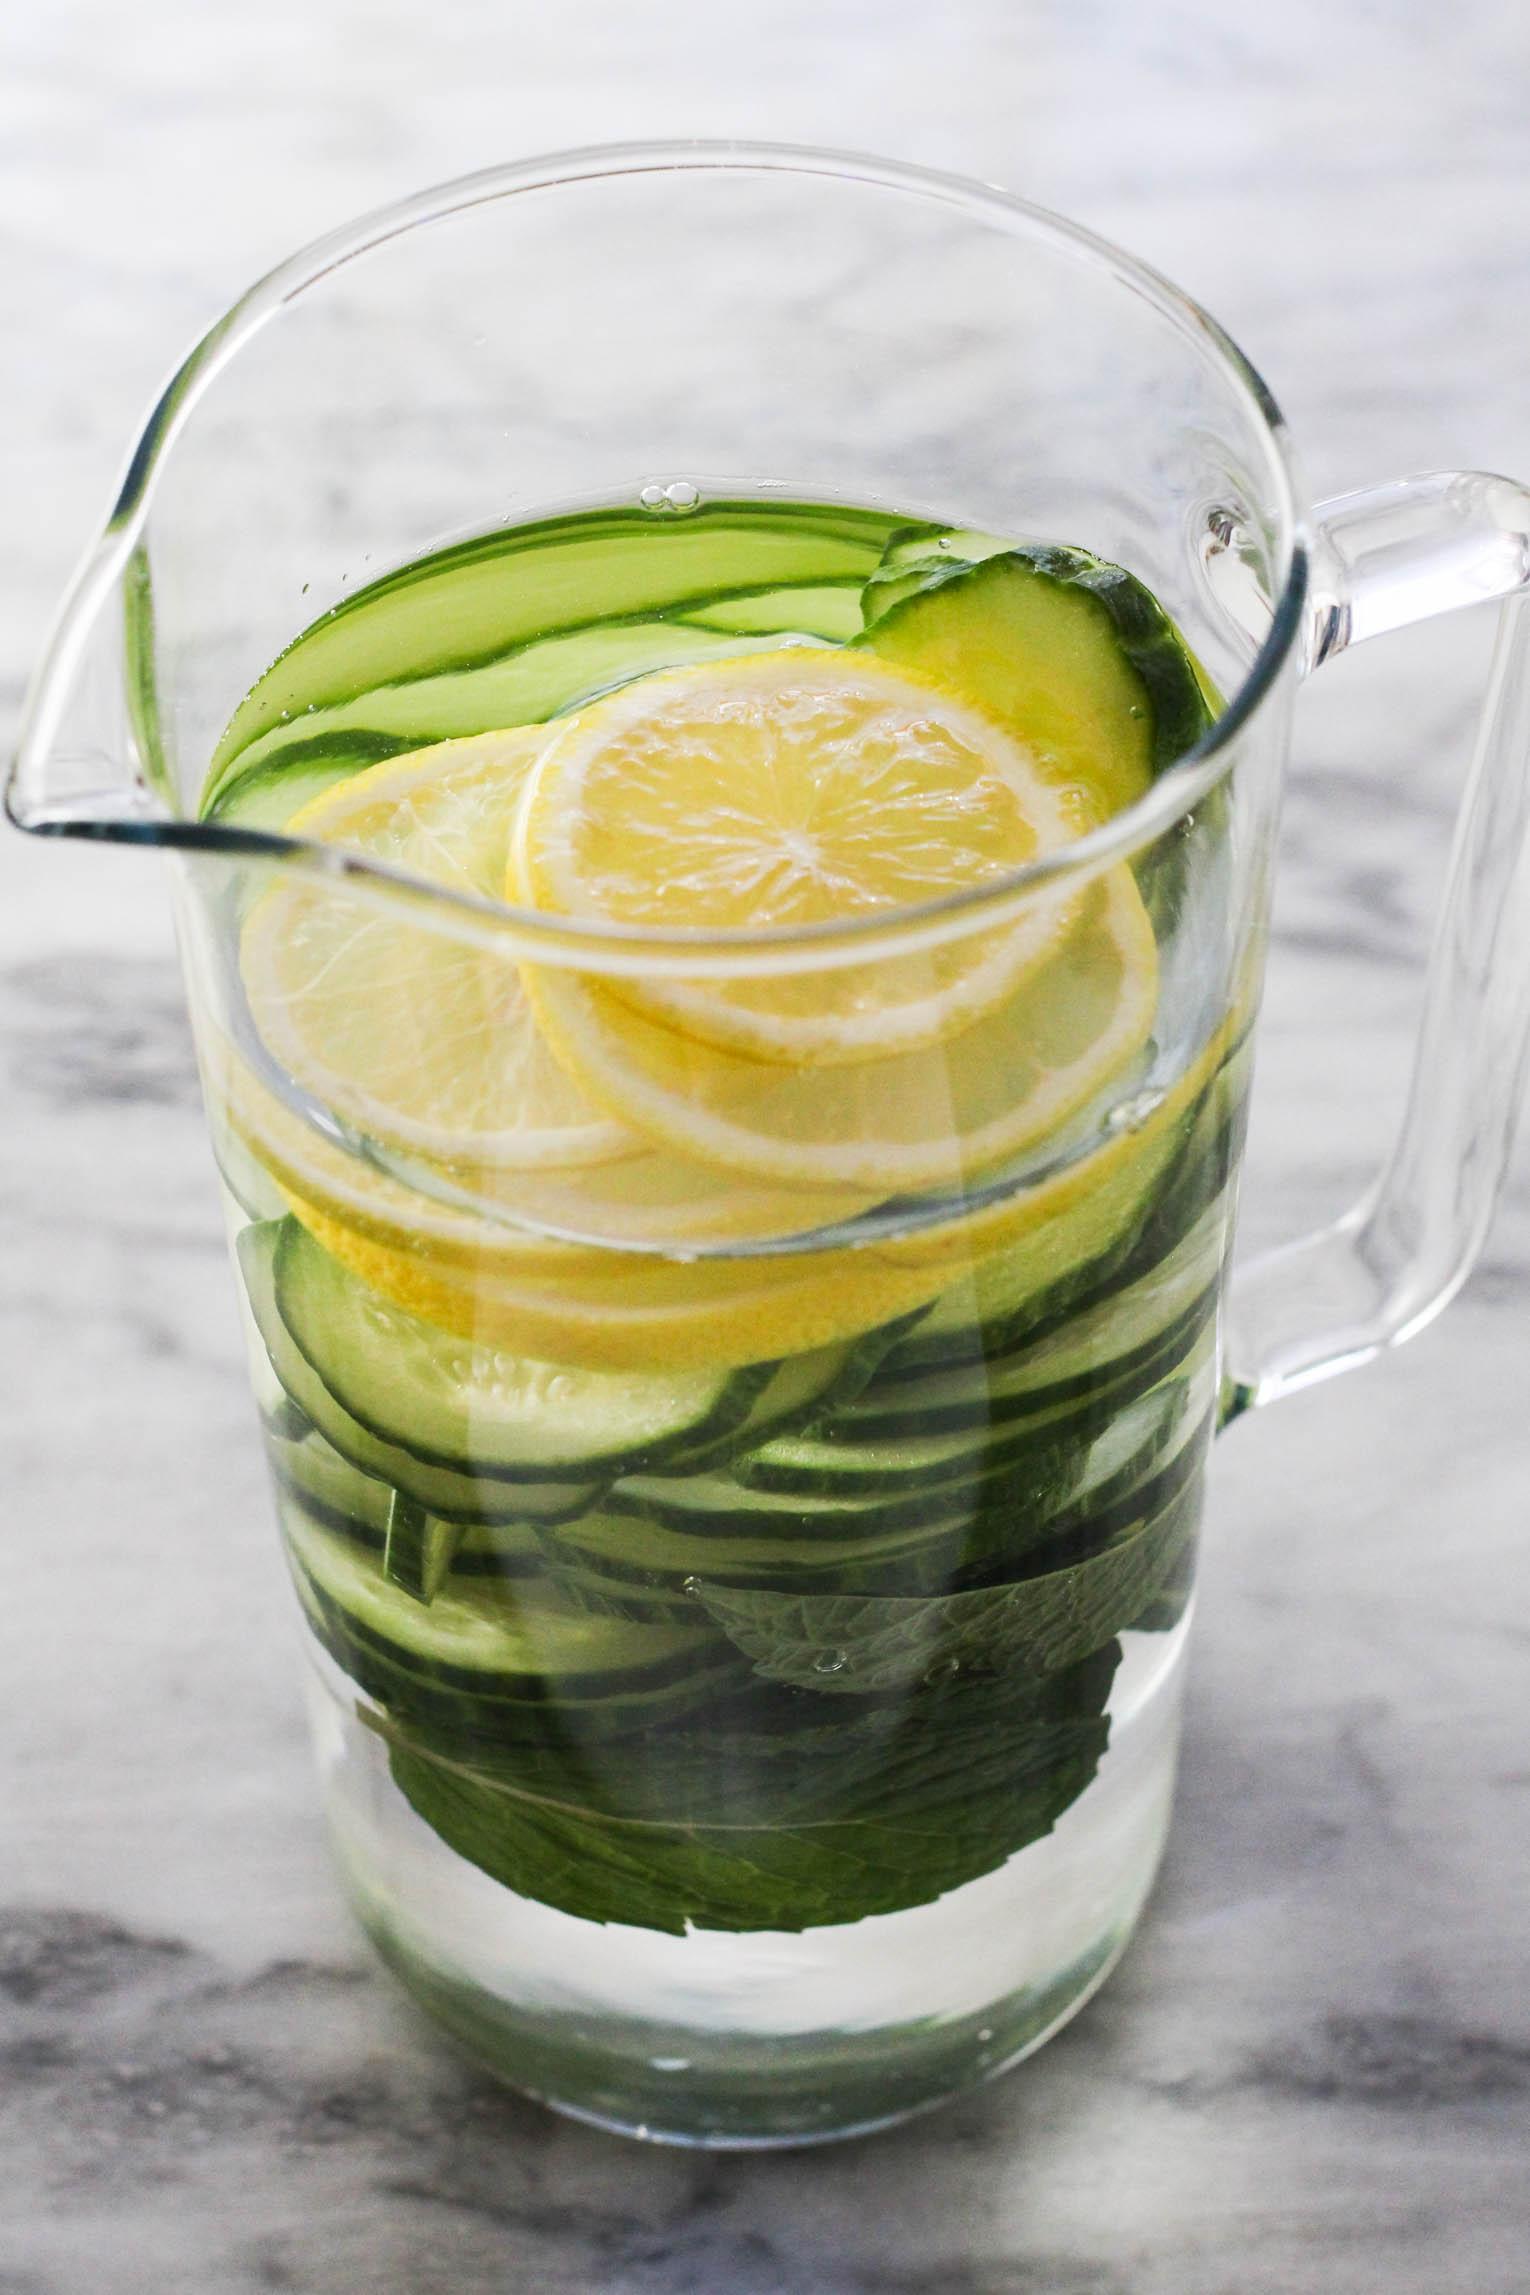 Mint leaves, cucumber slices, lemon slices, and water in a pitcher standing on marble background.